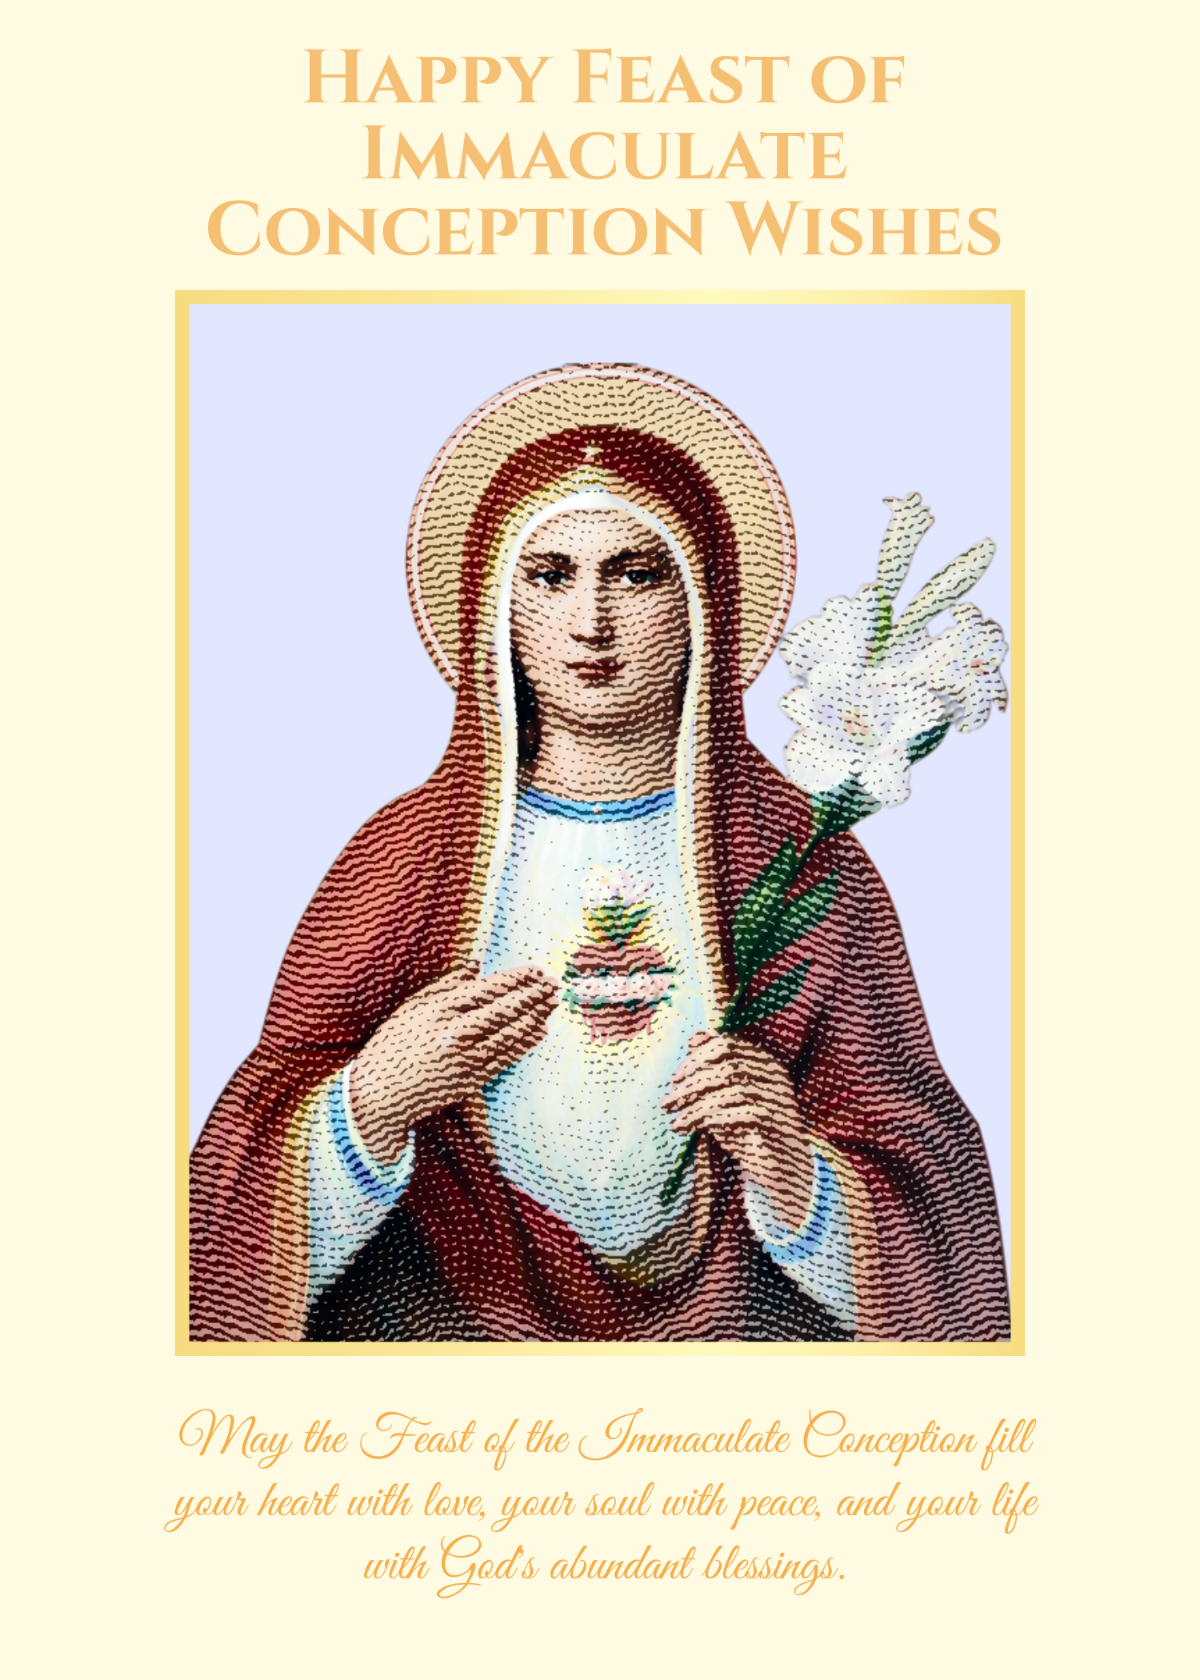 Happy Feast of Immaculate Conception Wishes Template